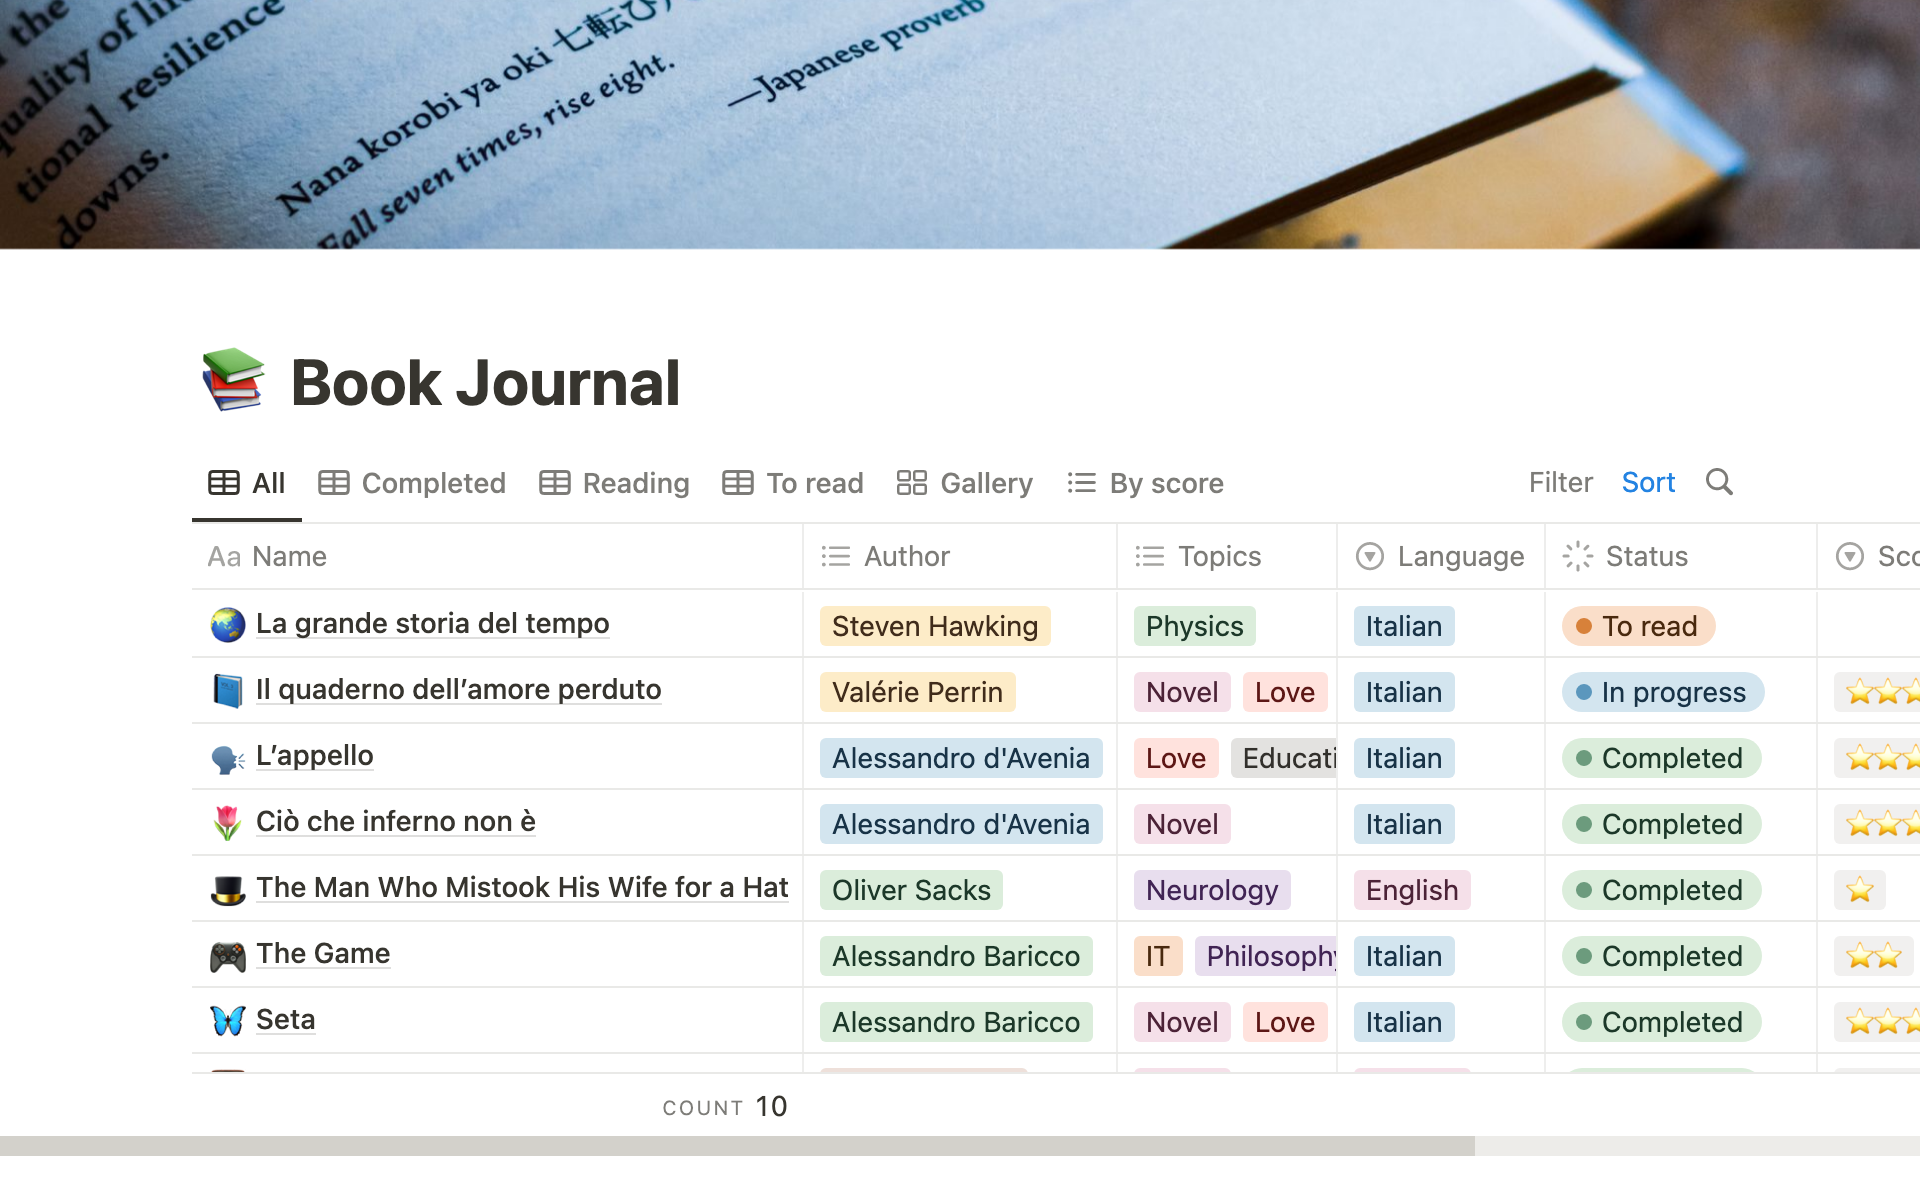 Helps you keep track of all your books.